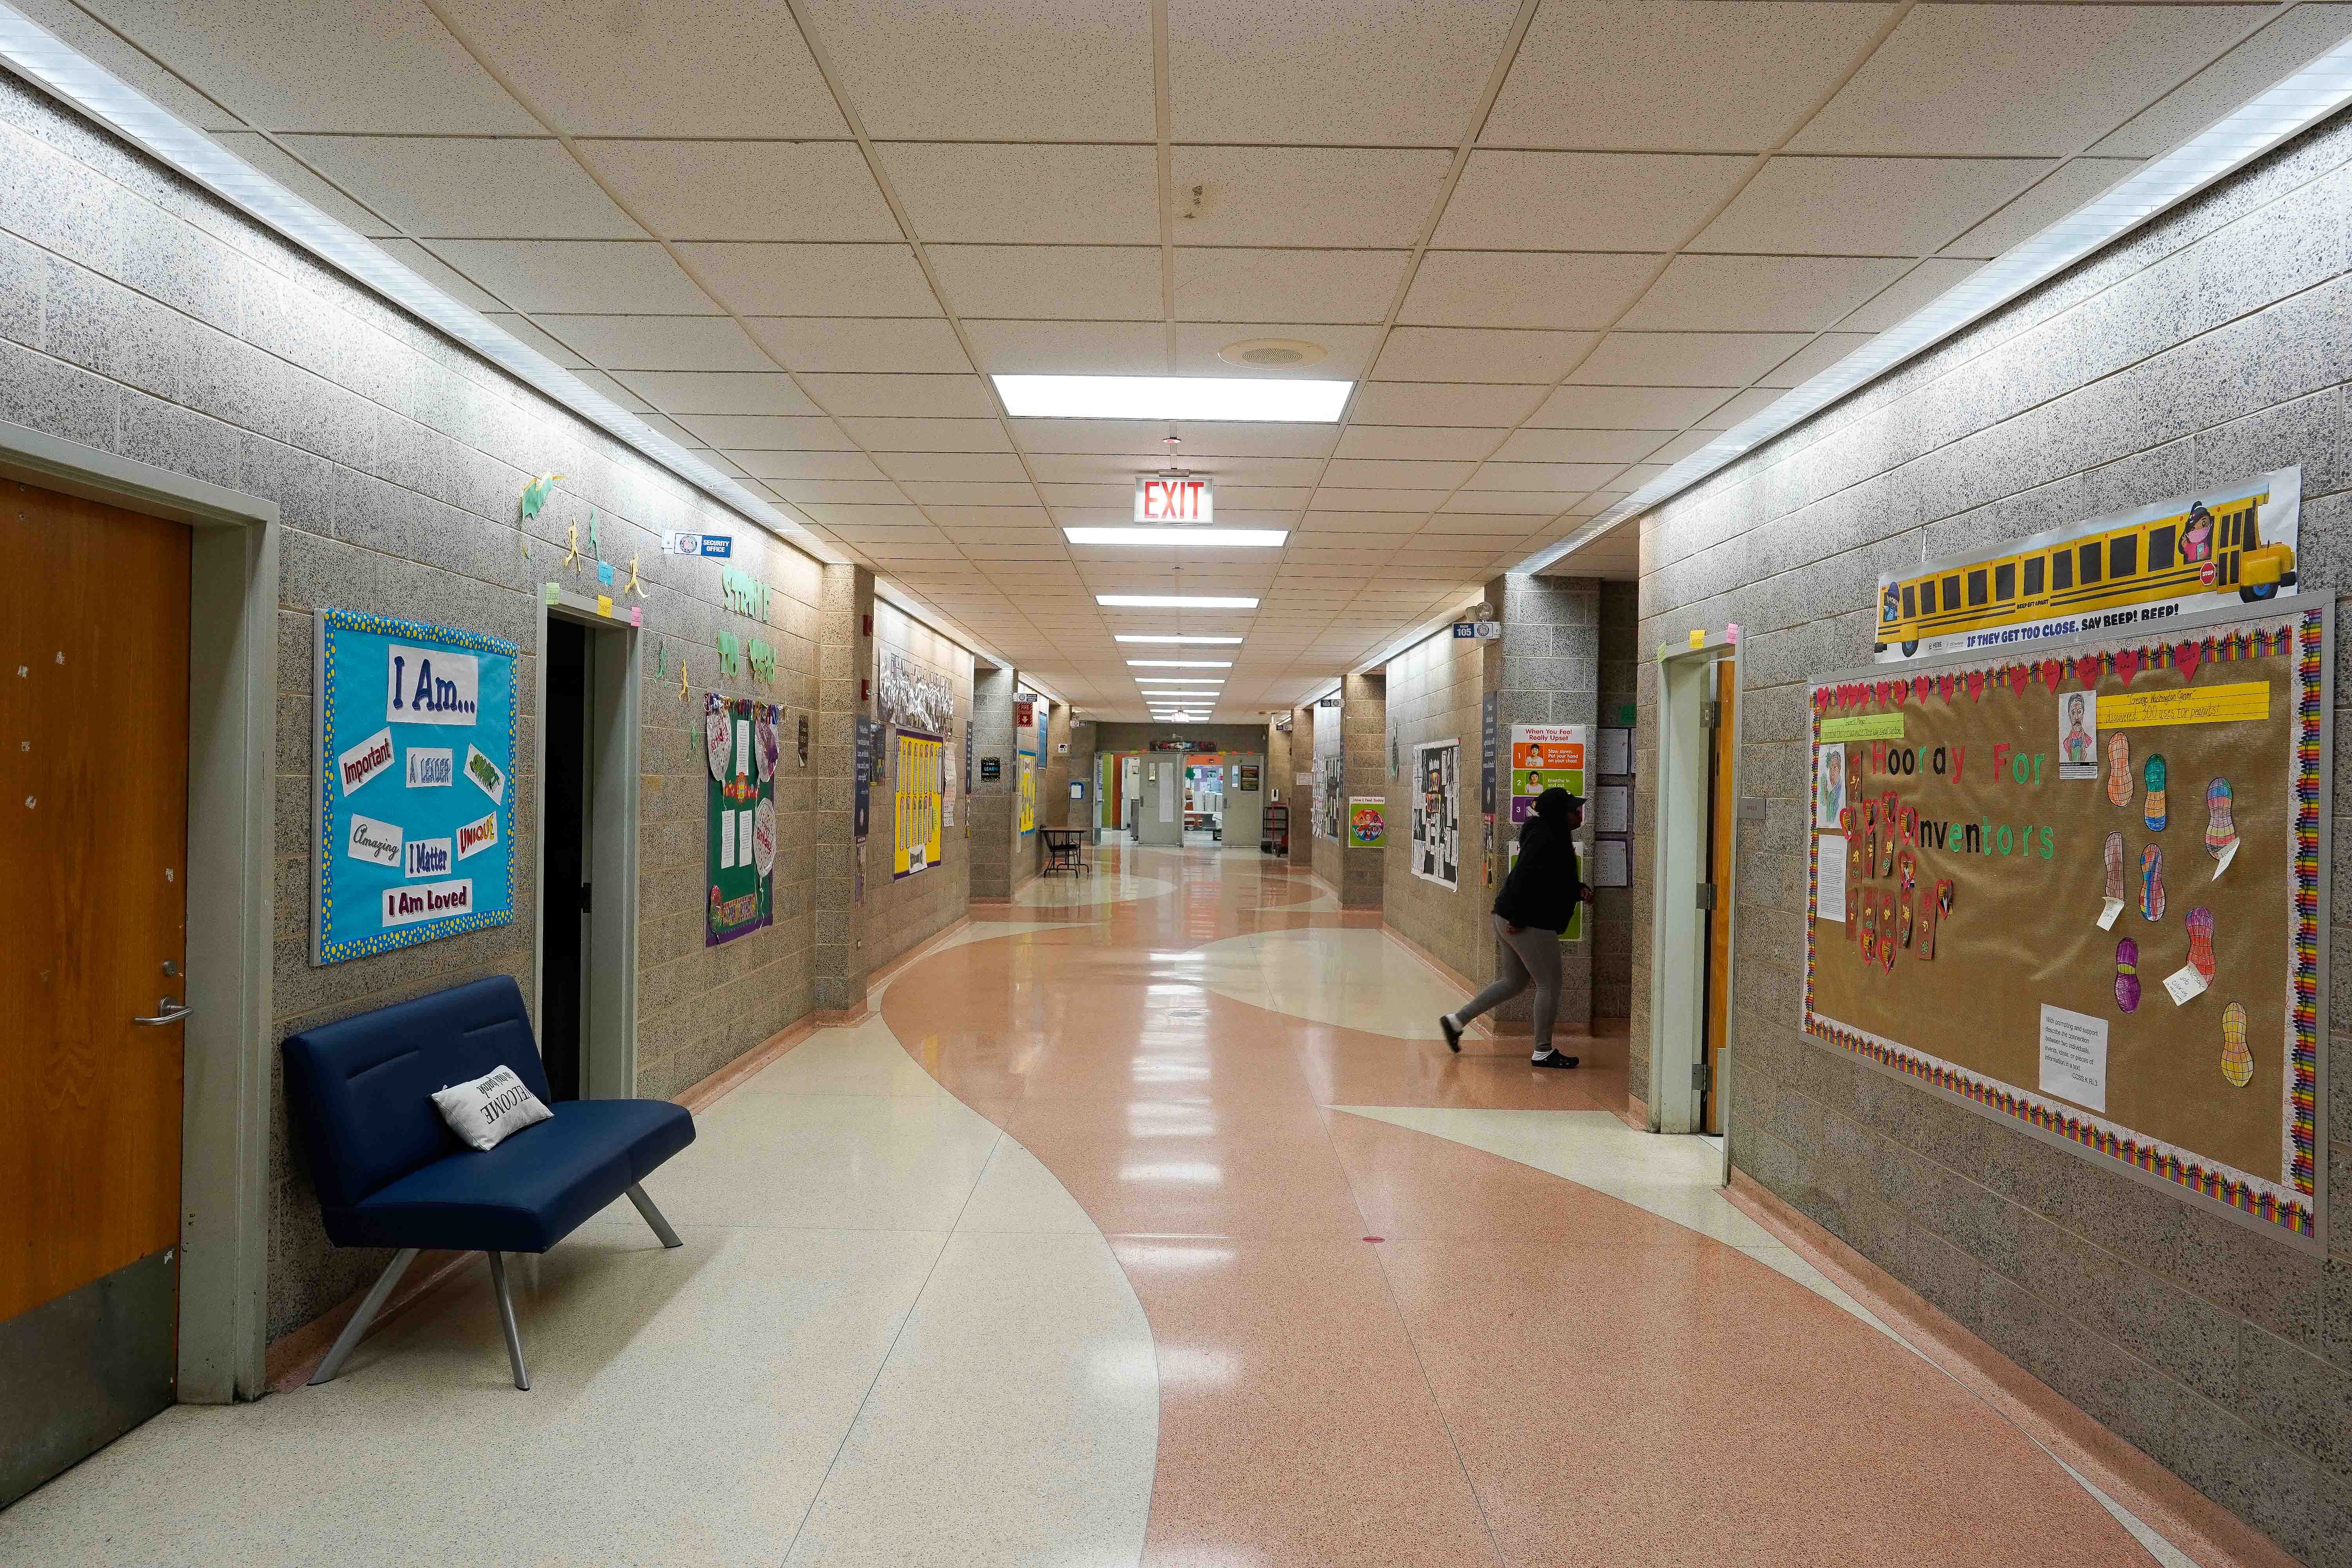 A school hallway with one student walking into a classroom door. The walls are covered in bulletin boards and art.